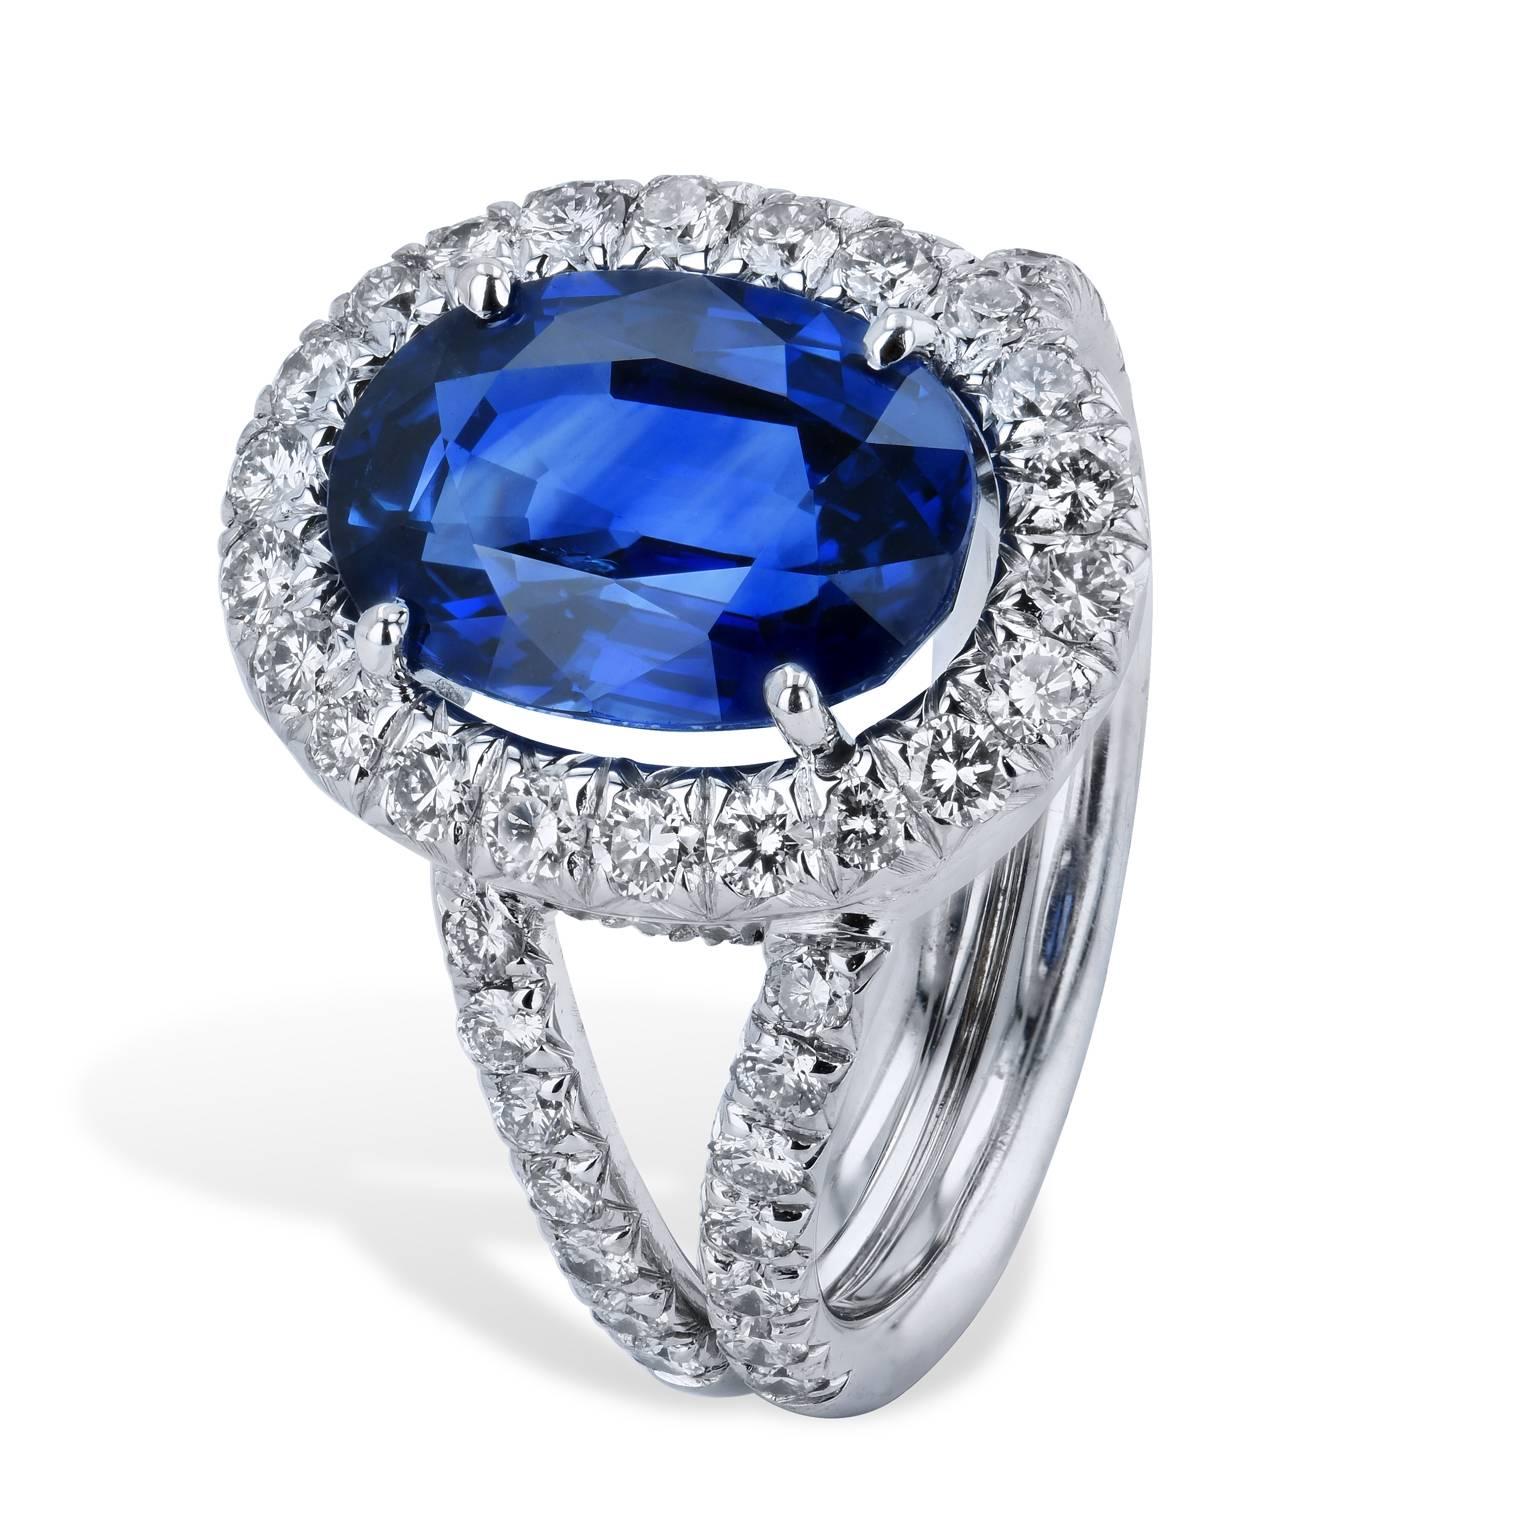 Elegance coupled with impeccable design, this handmade blue sapphire and diamond ring is a piece for the regal woman full of poise and grace. Featuring a 4.37 carat blue heated sapphire at center (GIA# 1106515154) while 1.04 carat of round brilliant